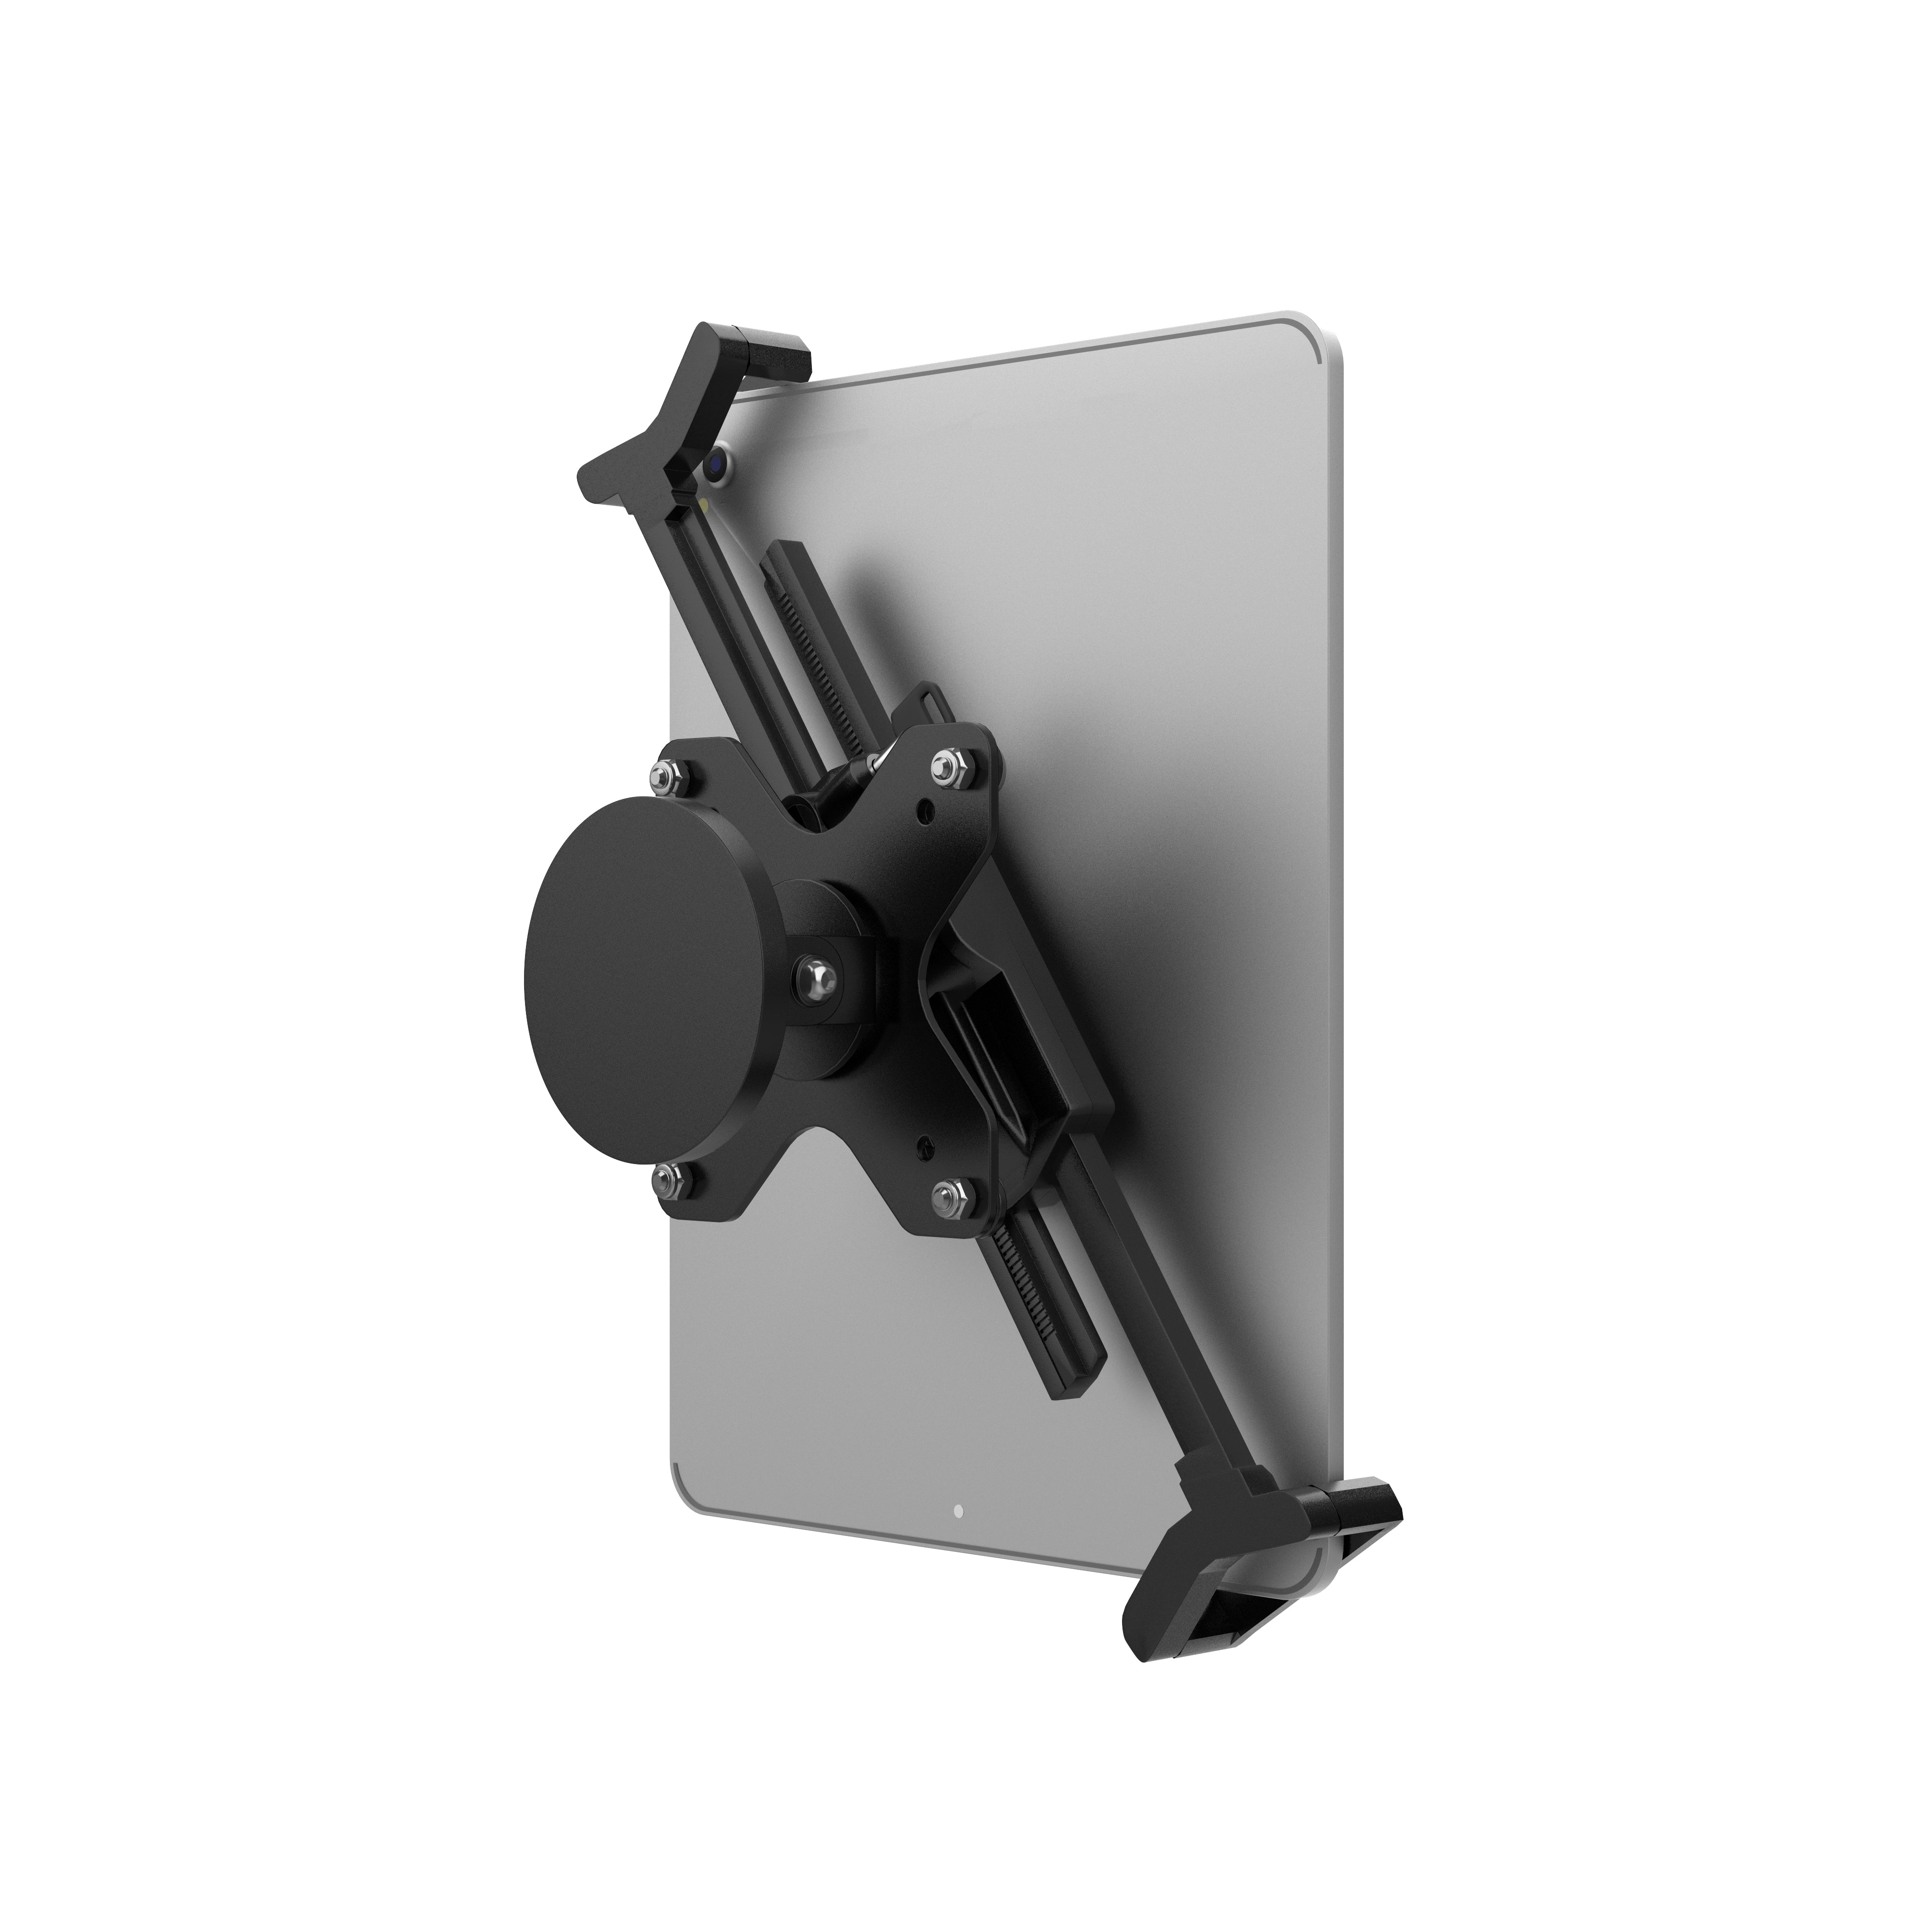 Heavy-Duty Magnetic Mount w/ Universal Security Tablet Holder for 7 - 14 inch Tablets